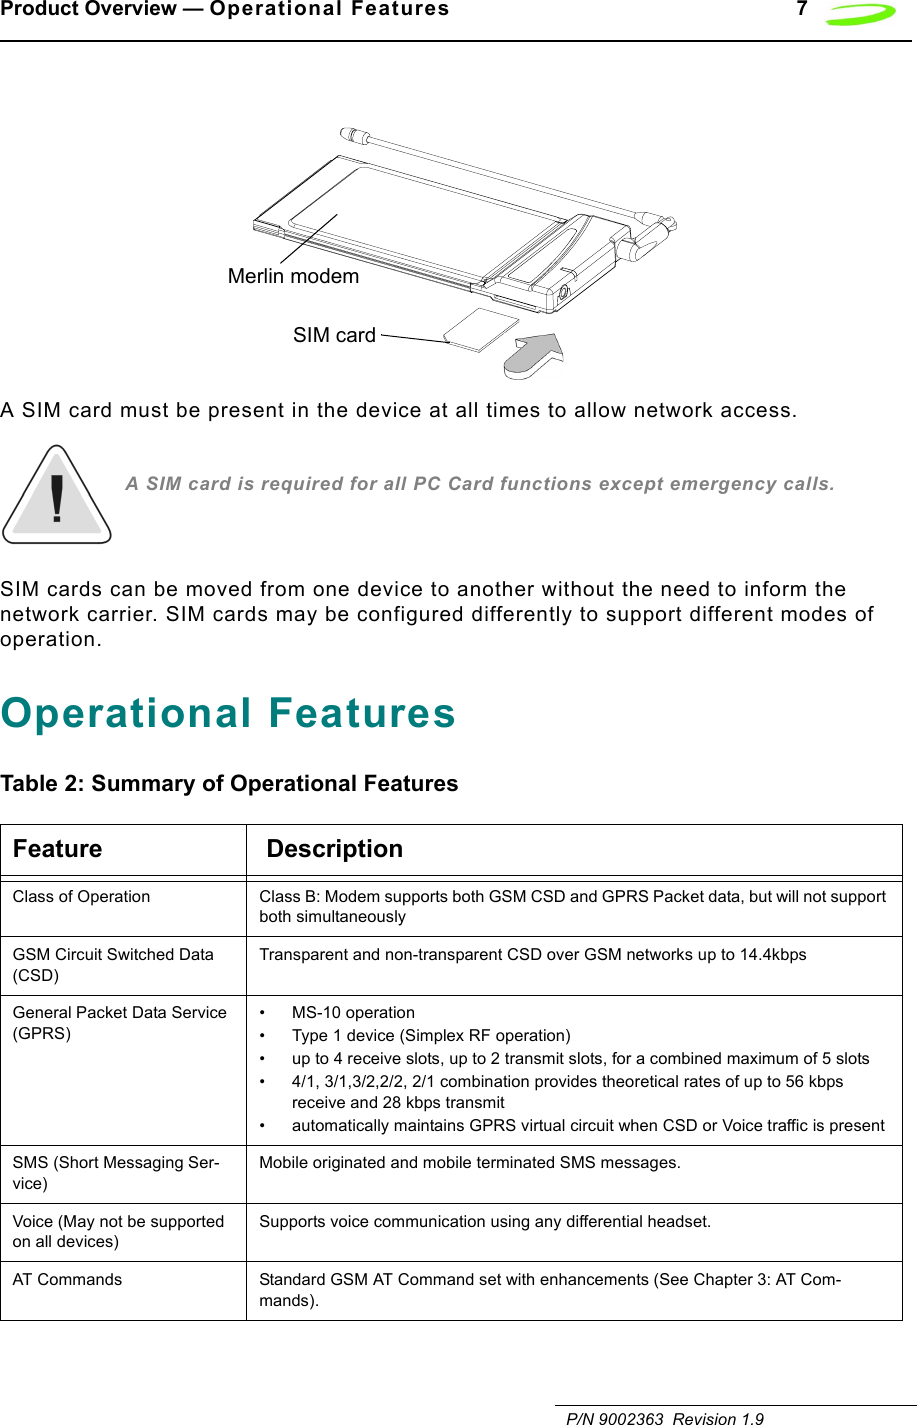 Product Overview — Operational Features 7   P/N 9002363  Revision 1.9A SIM card must be present in the device at all times to allow network access.A SIM card is required for all PC Card functions except emergency calls.SIM cards can be moved from one device to another without the need to inform the network carrier. SIM cards may be configured differently to support different modes of operation.Operational FeaturesTable 2: Summary of Operational FeaturesFeature  DescriptionClass of Operation Class B: Modem supports both GSM CSD and GPRS Packet data, but will not support both simultaneouslyGSM Circuit Switched Data (CSD)Transparent and non-transparent CSD over GSM networks up to 14.4kbpsGeneral Packet Data Service (GPRS)• MS-10 operation• Type 1 device (Simplex RF operation)• up to 4 receive slots, up to 2 transmit slots, for a combined maximum of 5 slots • 4/1, 3/1,3/2,2/2, 2/1 combination provides theoretical rates of up to 56 kbps receive and 28 kbps transmit• automatically maintains GPRS virtual circuit when CSD or Voice traffic is presentSMS (Short Messaging Ser-vice)Mobile originated and mobile terminated SMS messages.Voice (May not be supported on all devices)Supports voice communication using any differential headset.AT Commands Standard GSM AT Command set with enhancements (See Chapter 3: AT Com-mands).SIM cardMerlin modem